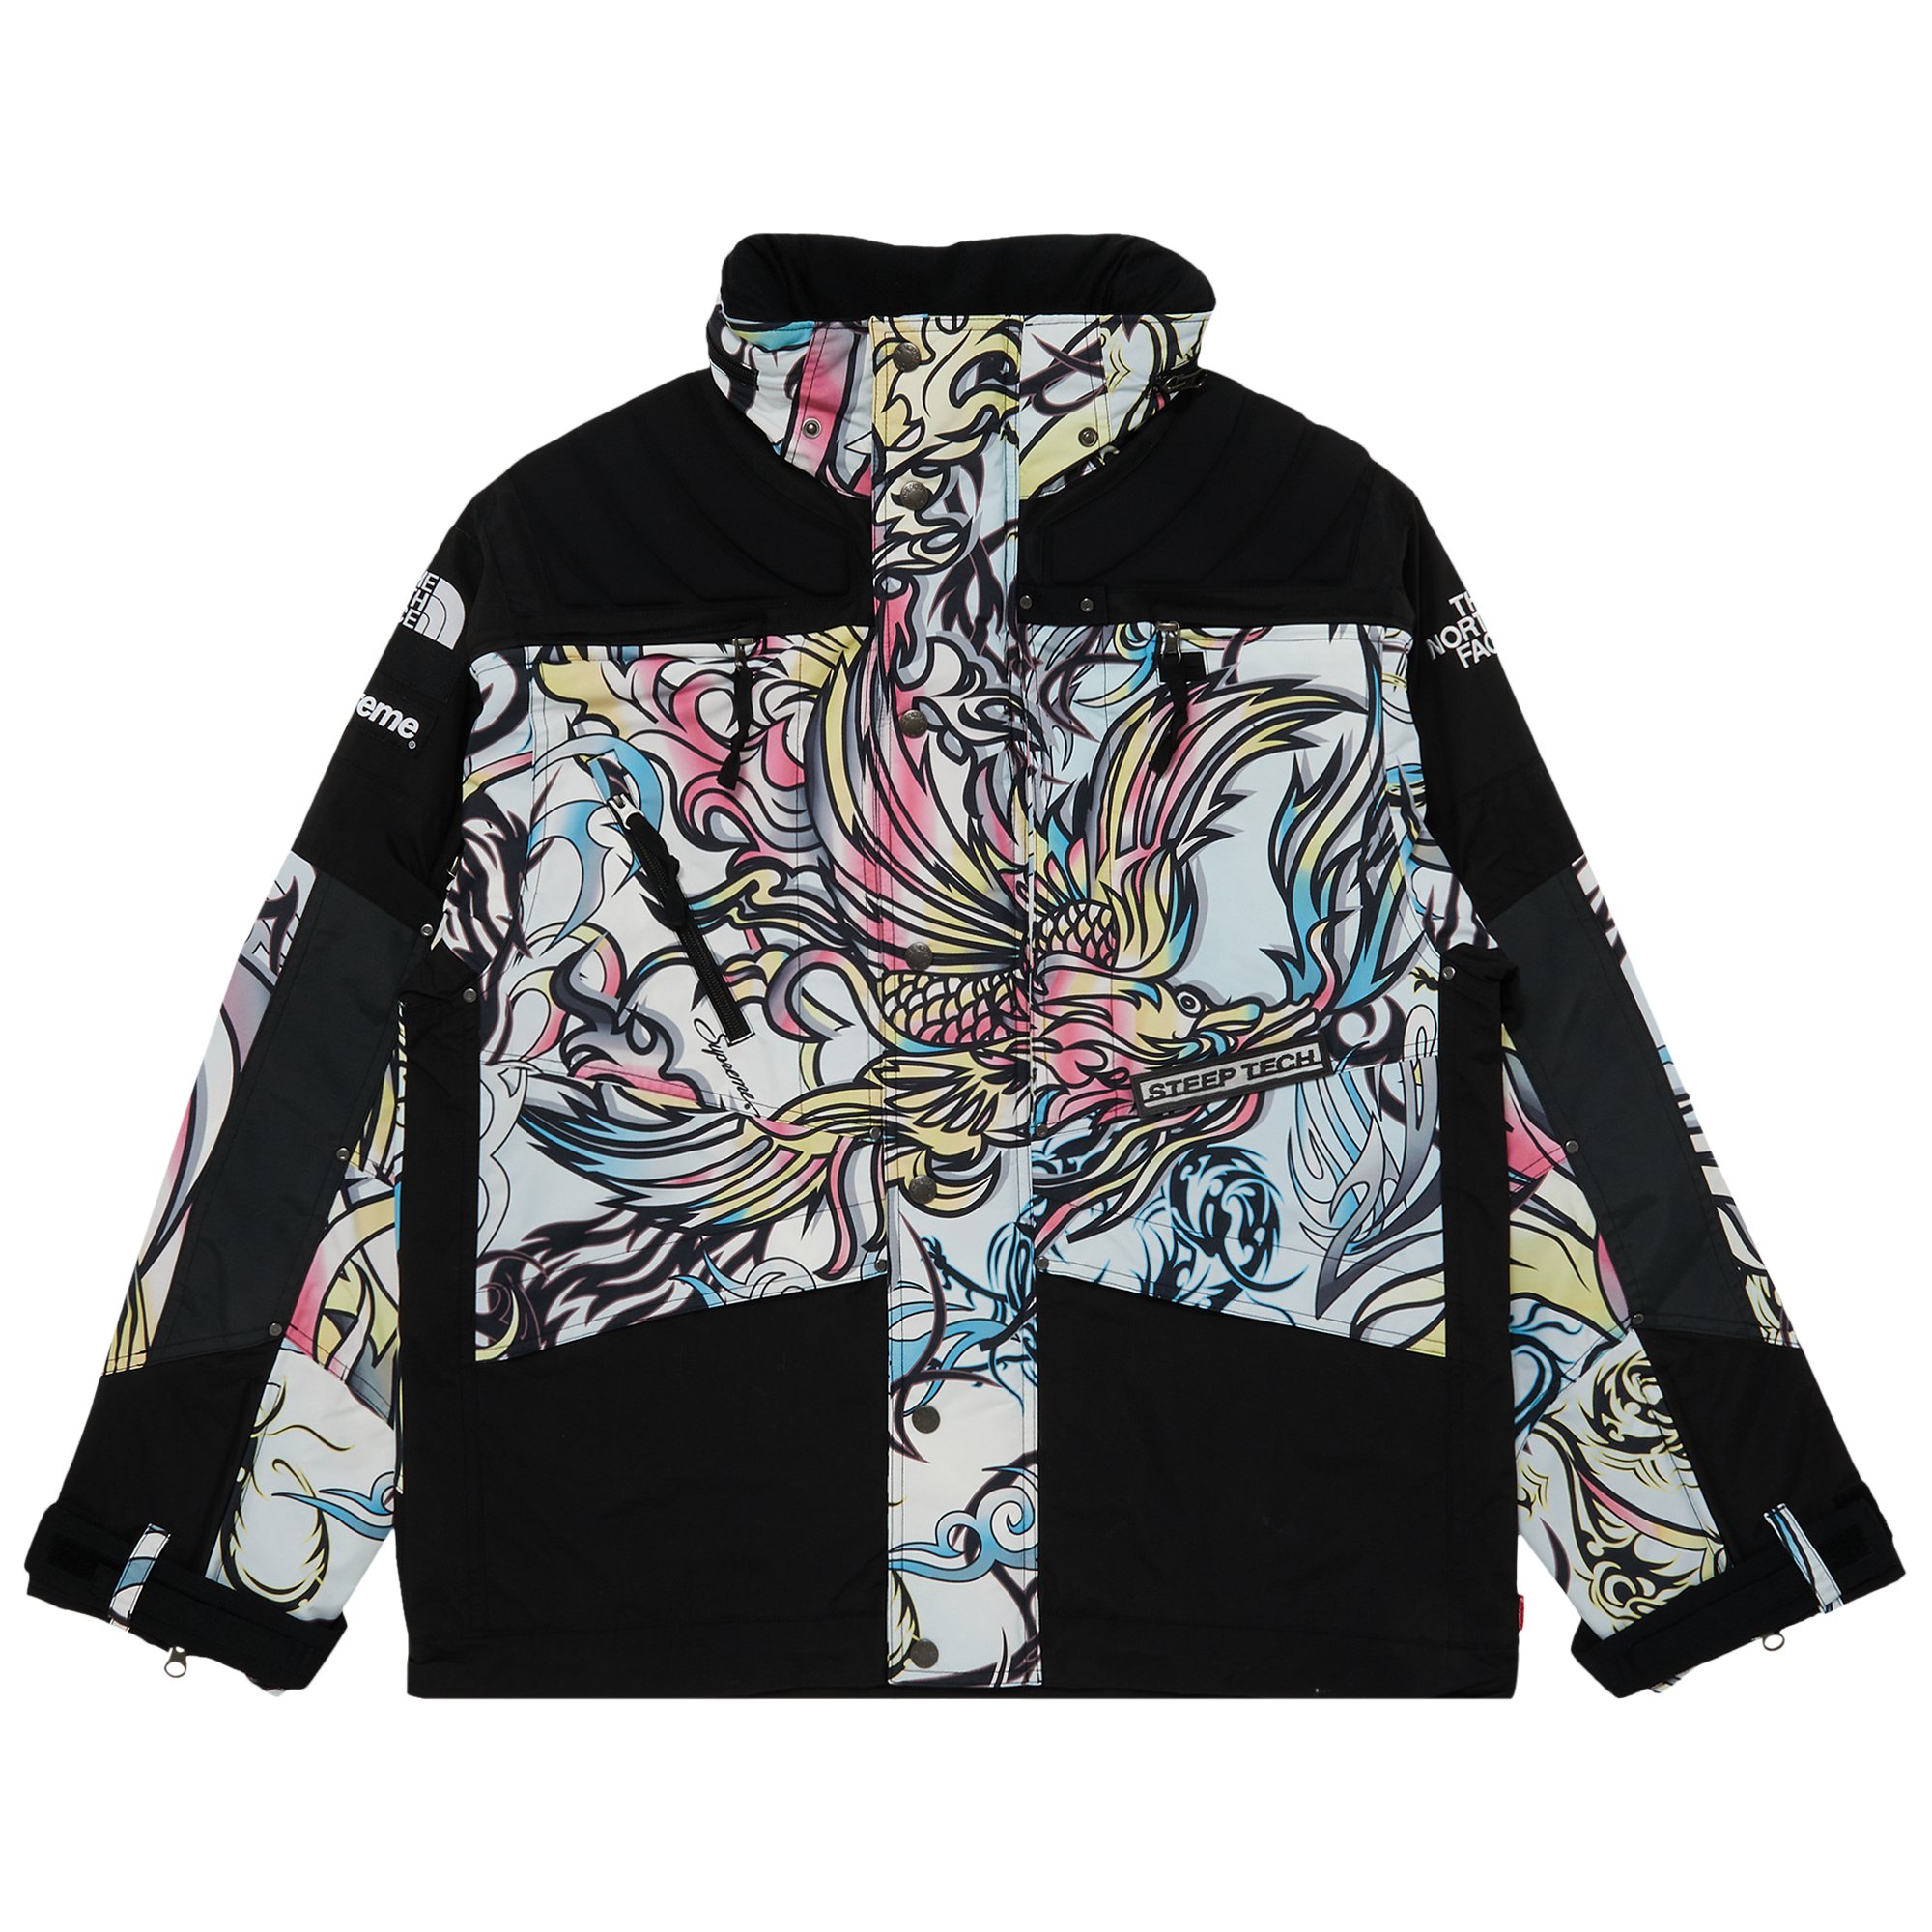 Supreme x The North Face Steep Tech Apogee Jacket 'Multicolor 